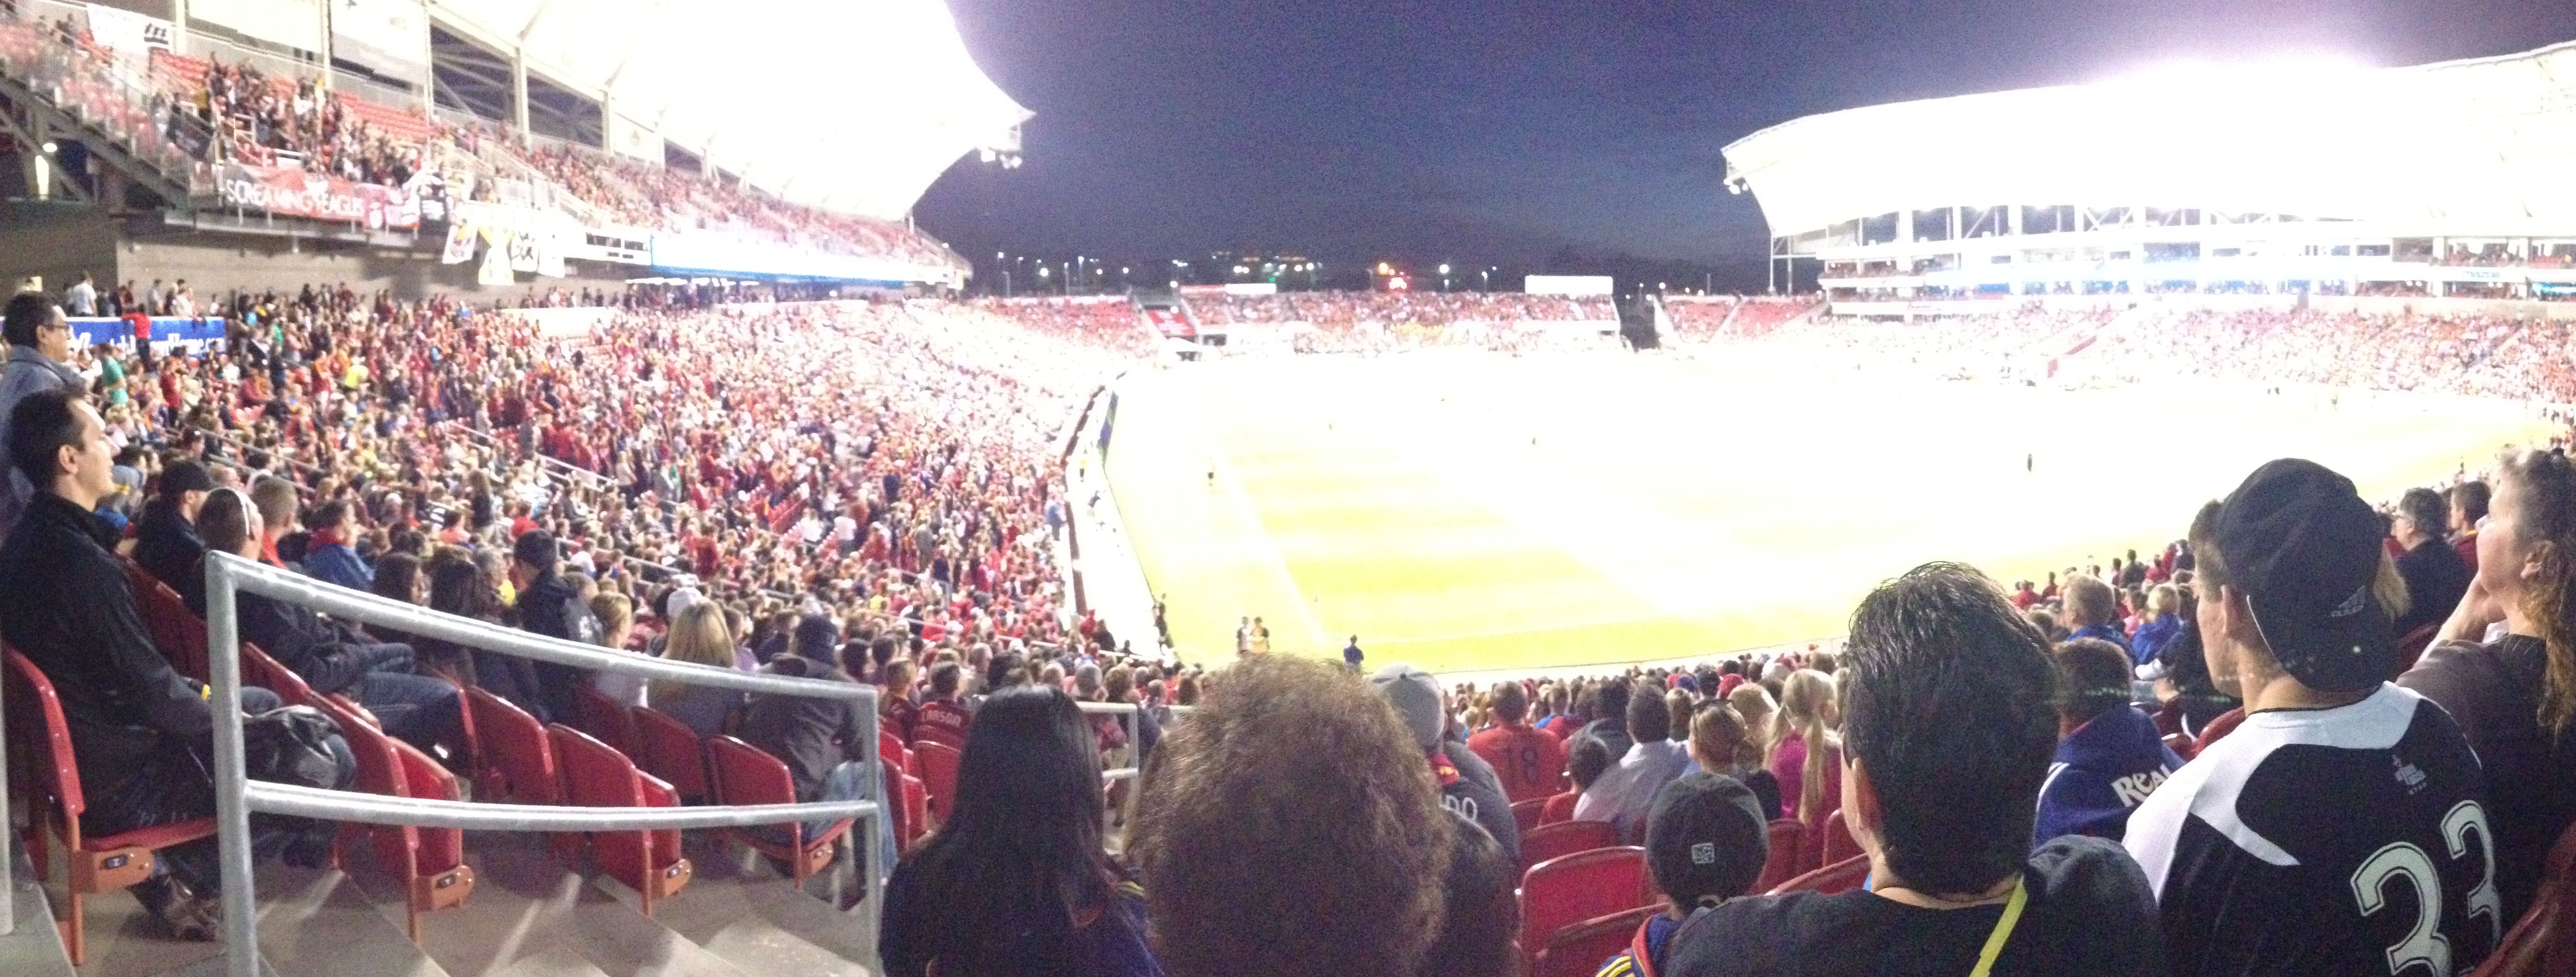 A shot from Rio Tinto Stadium in Sandy, Utah, taken during the U.S. Open Cup championship match between D.C. United and Real Salt Lake, October 1, 2013. D.C. United won 1-0.